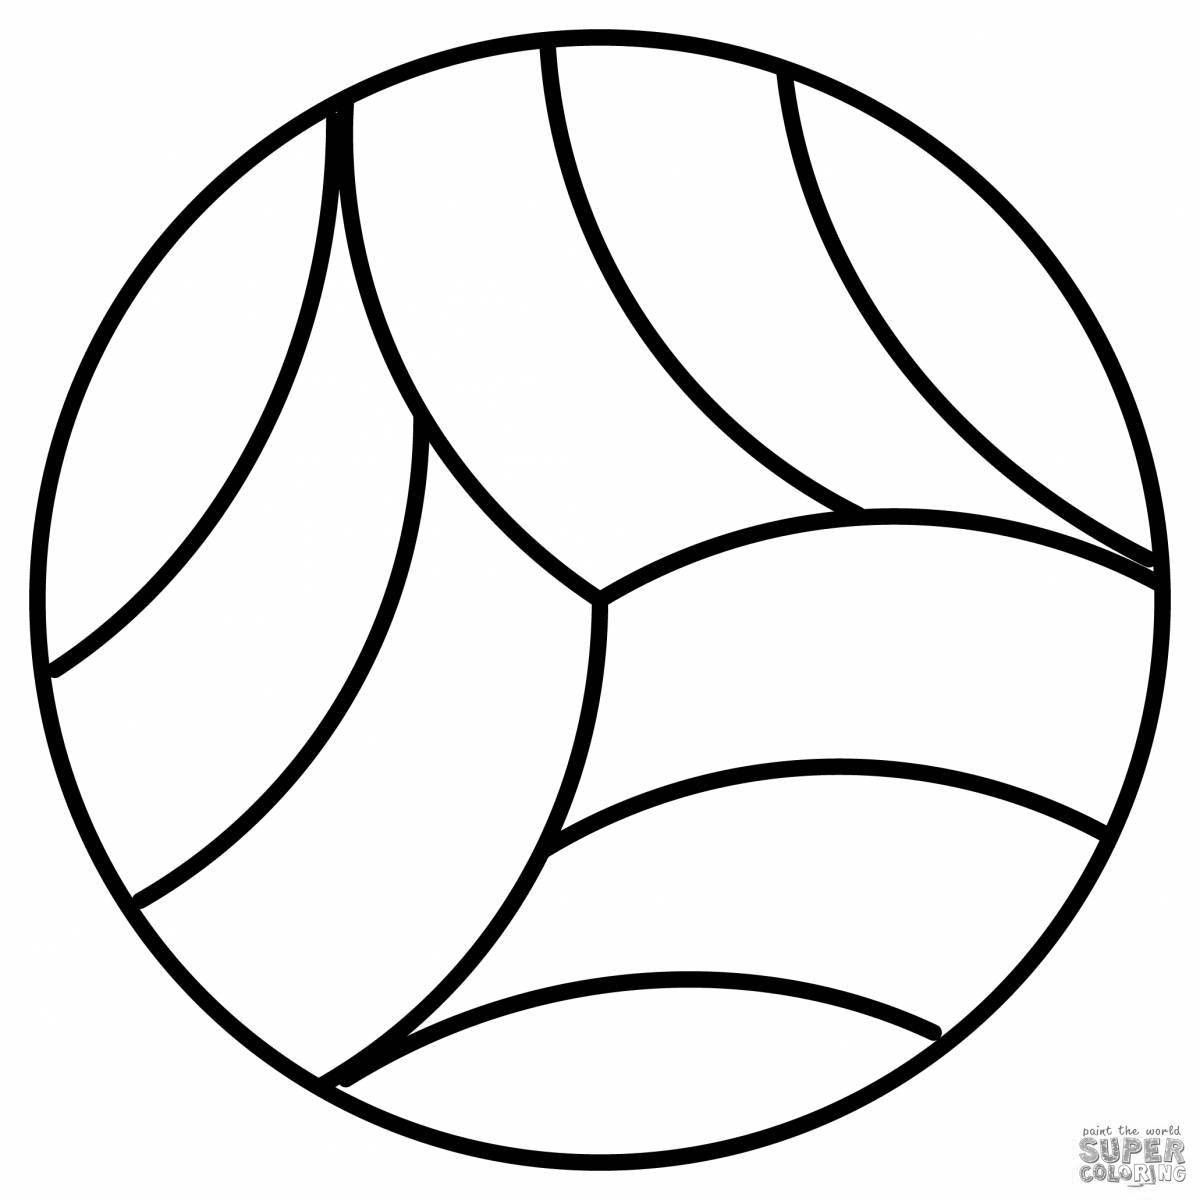 Colorful volleyball coloring book for kids